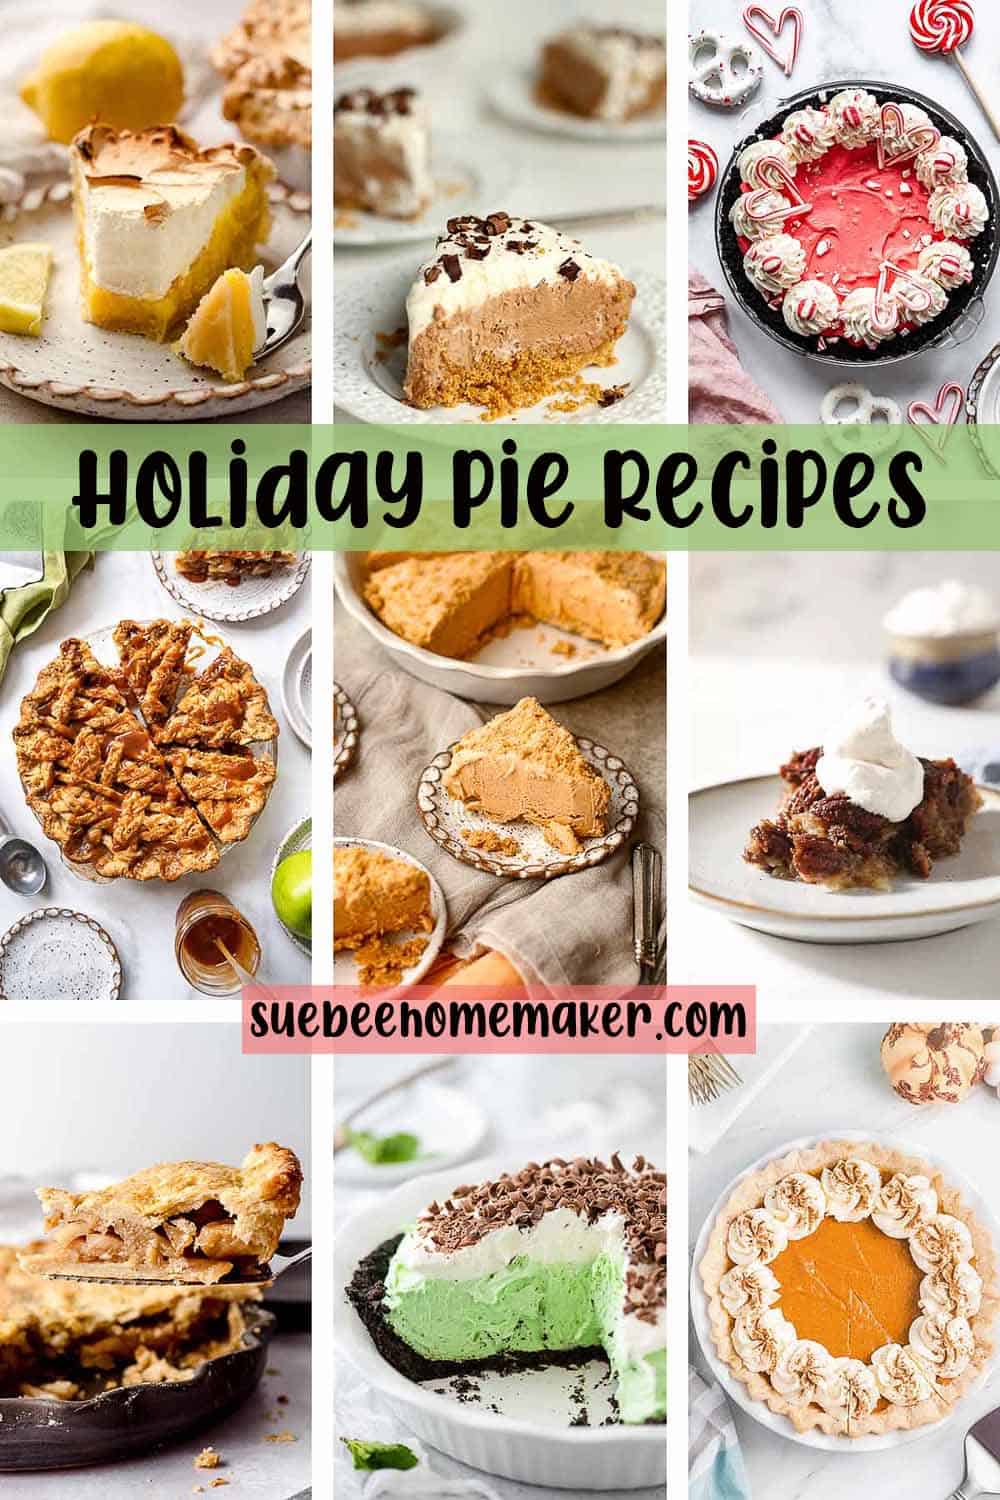 A collage of holiday pie recipes.